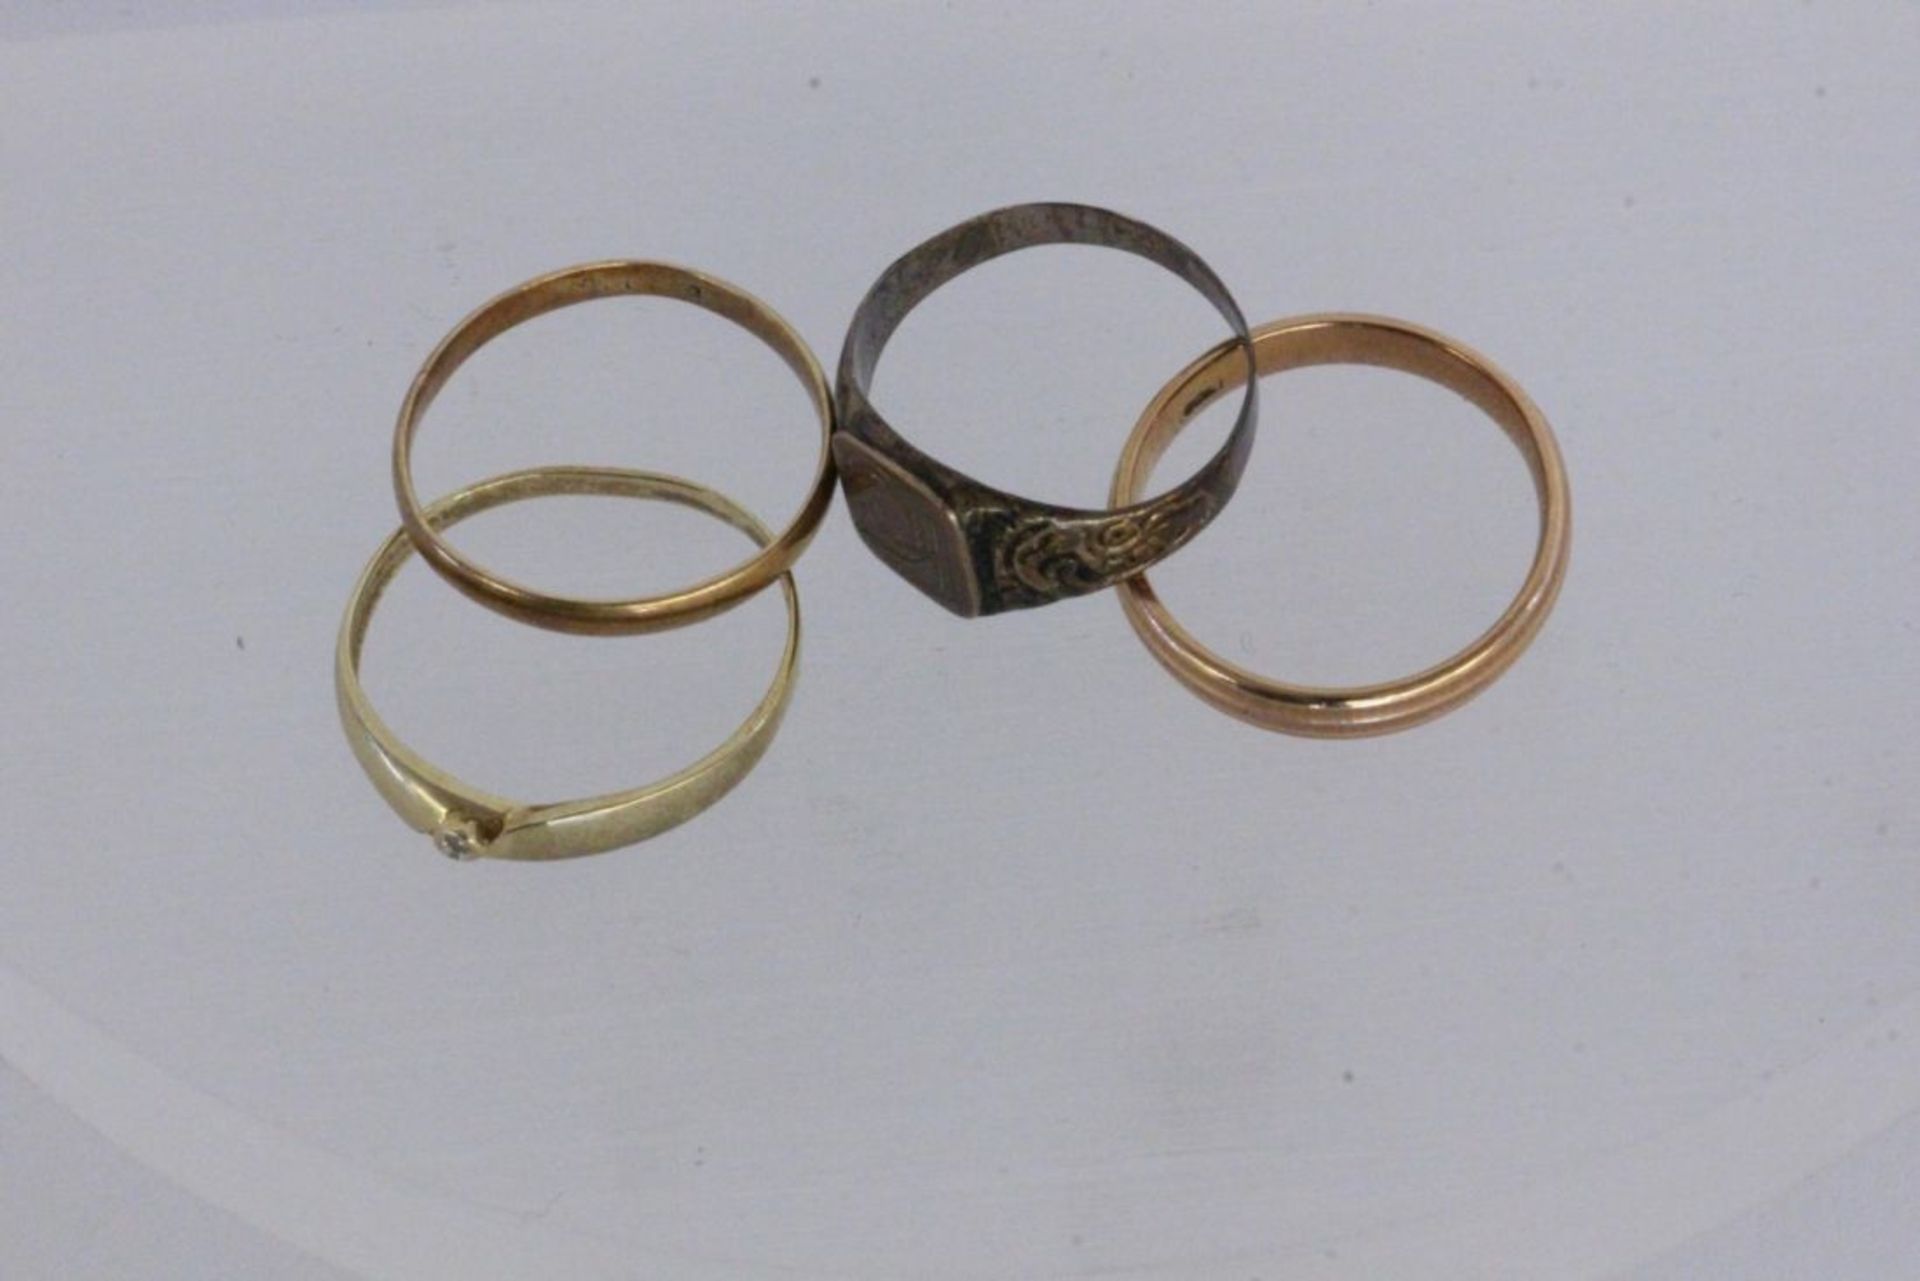 A LOT OF 4 GOLD RINGS 585/000 yellow gold, totalling approximately 6.5 grams. Keywords: